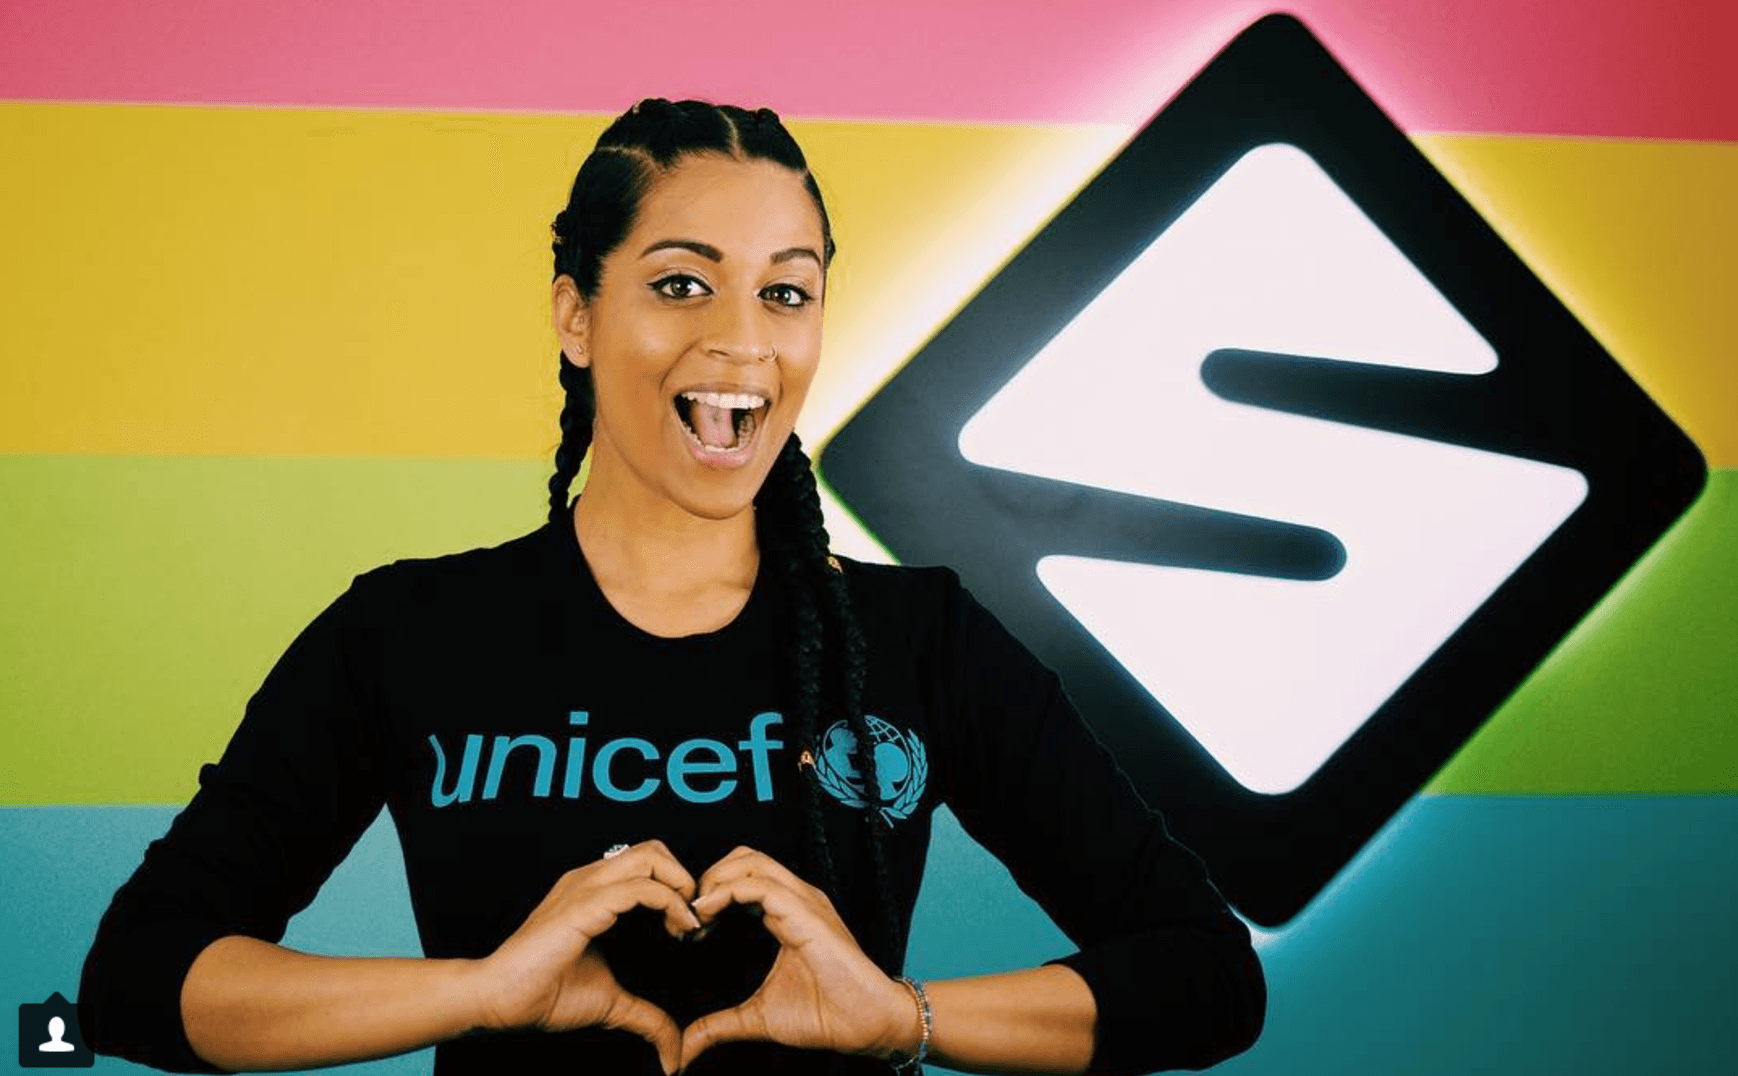 Lilly Singh poses with her hands in a heart symbol.